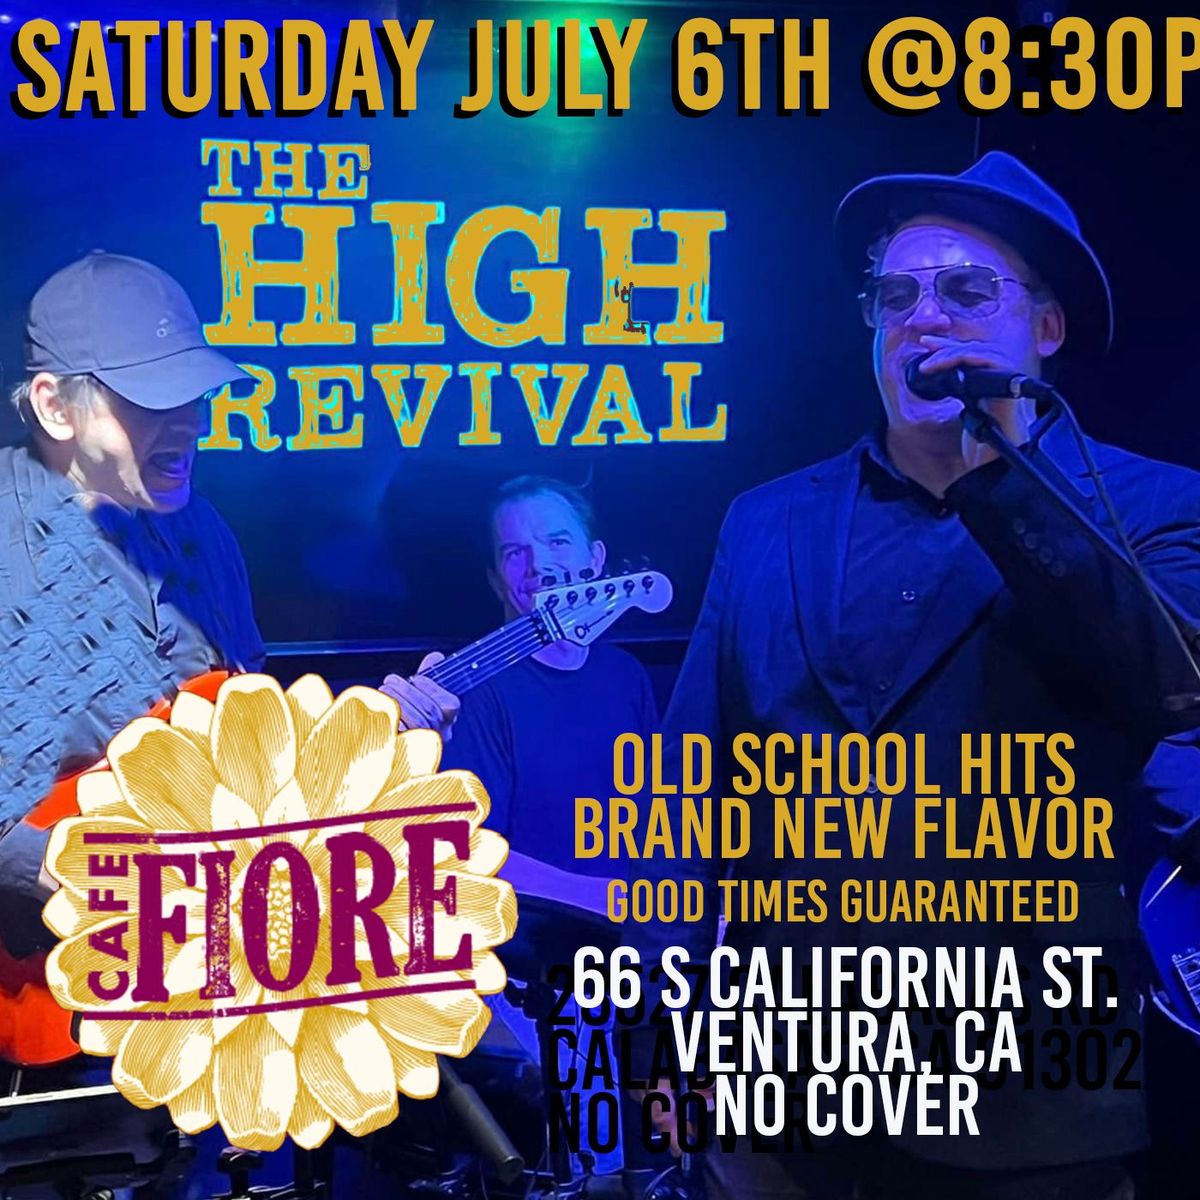 THE HIGH REVIVAL at CAFE FIORE!!!